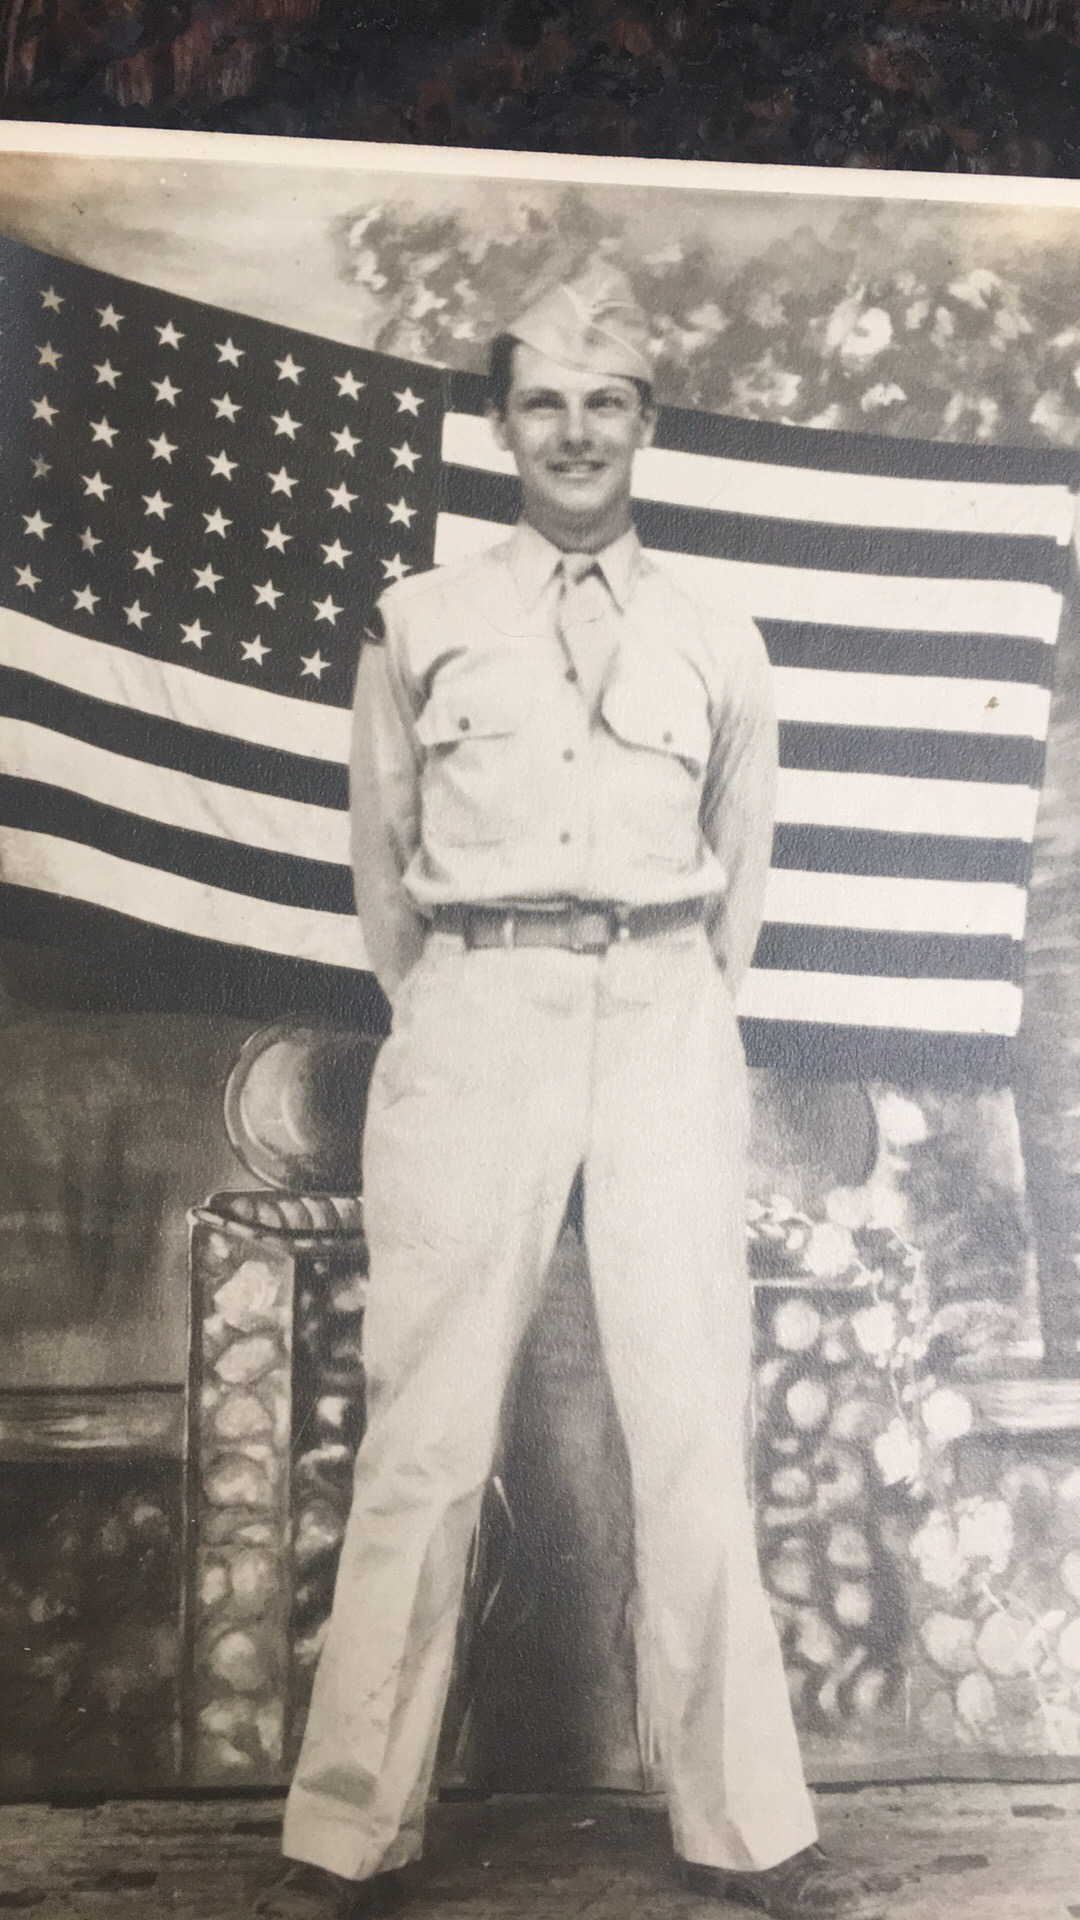 This is Laura's Dad/Matt's Grandfather. He was known as "Poppy" by my brother's kids. Matt never knew him. He served in WWII as a number one gunner with the 157th Infantry, 45th Division. He also received the Purple Heart and 2 oak leaf clusters